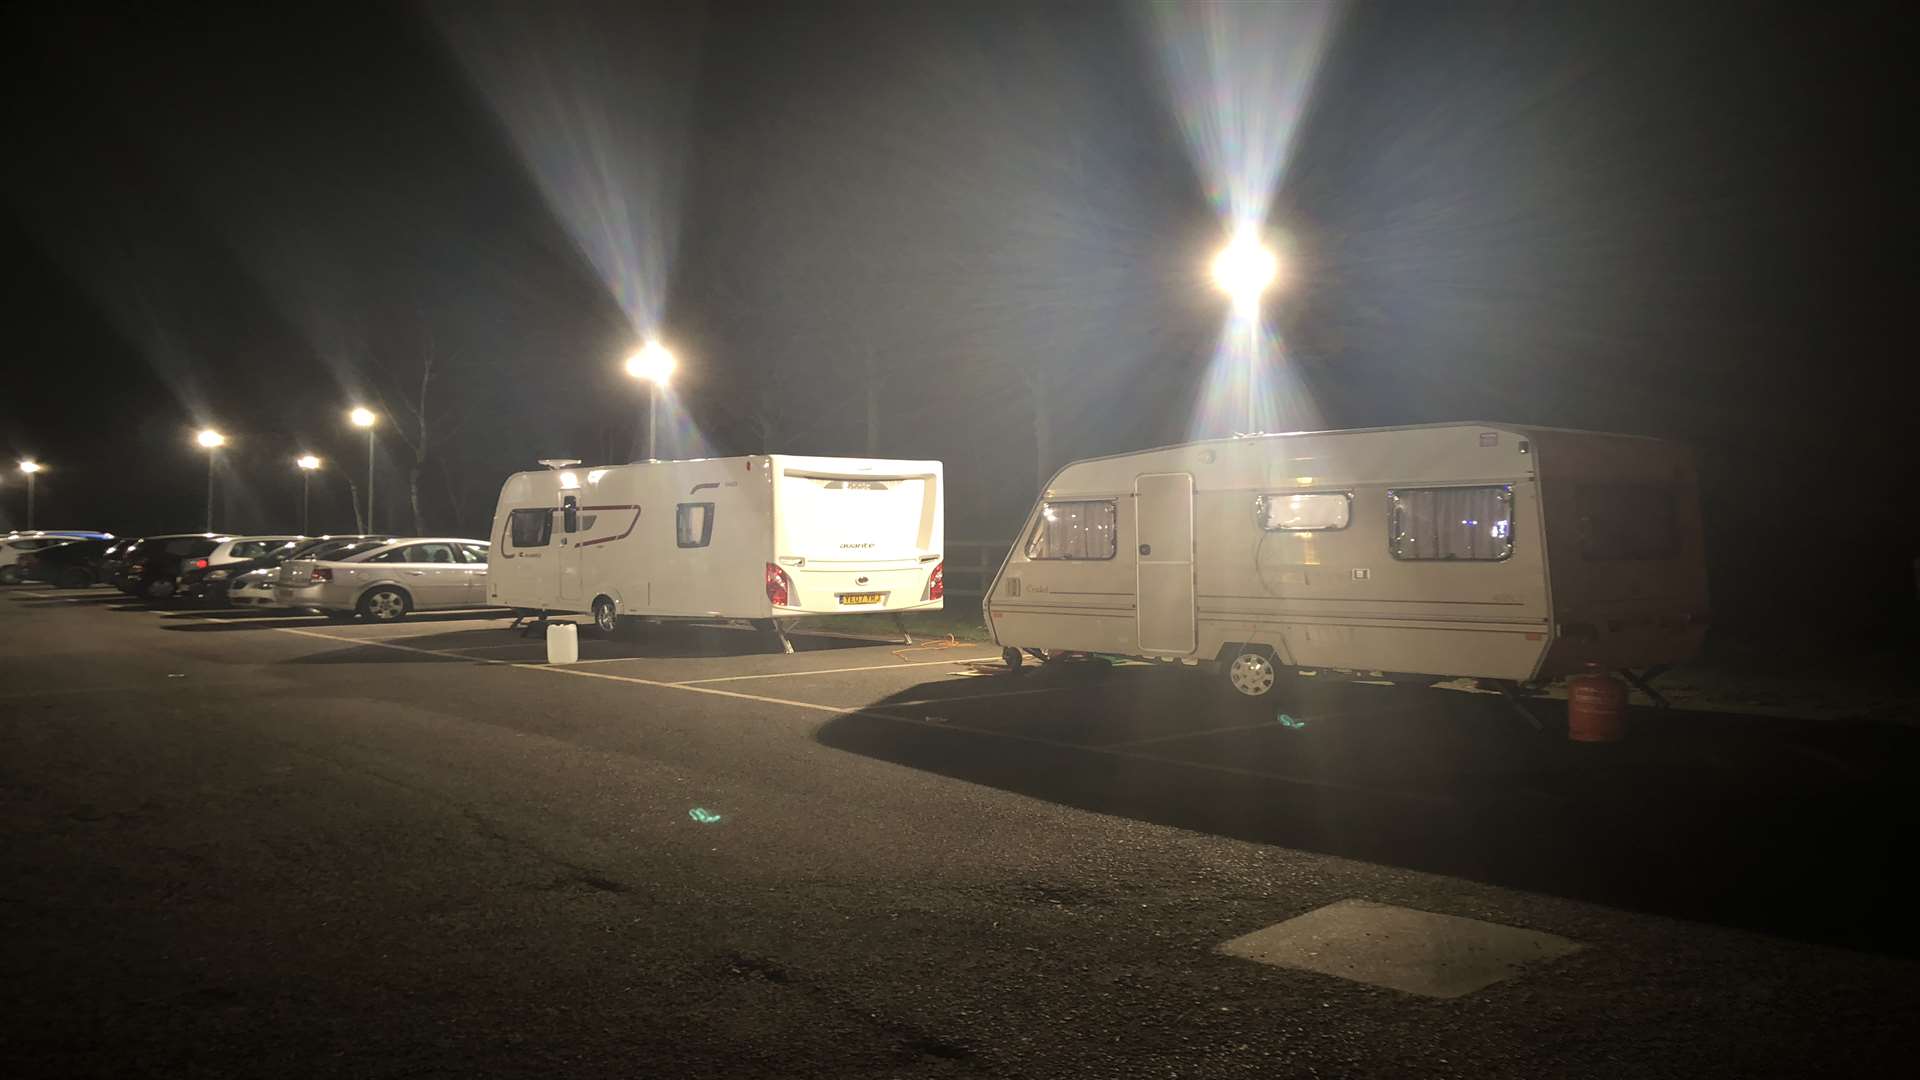 The travellers were spotted on Monday evening.